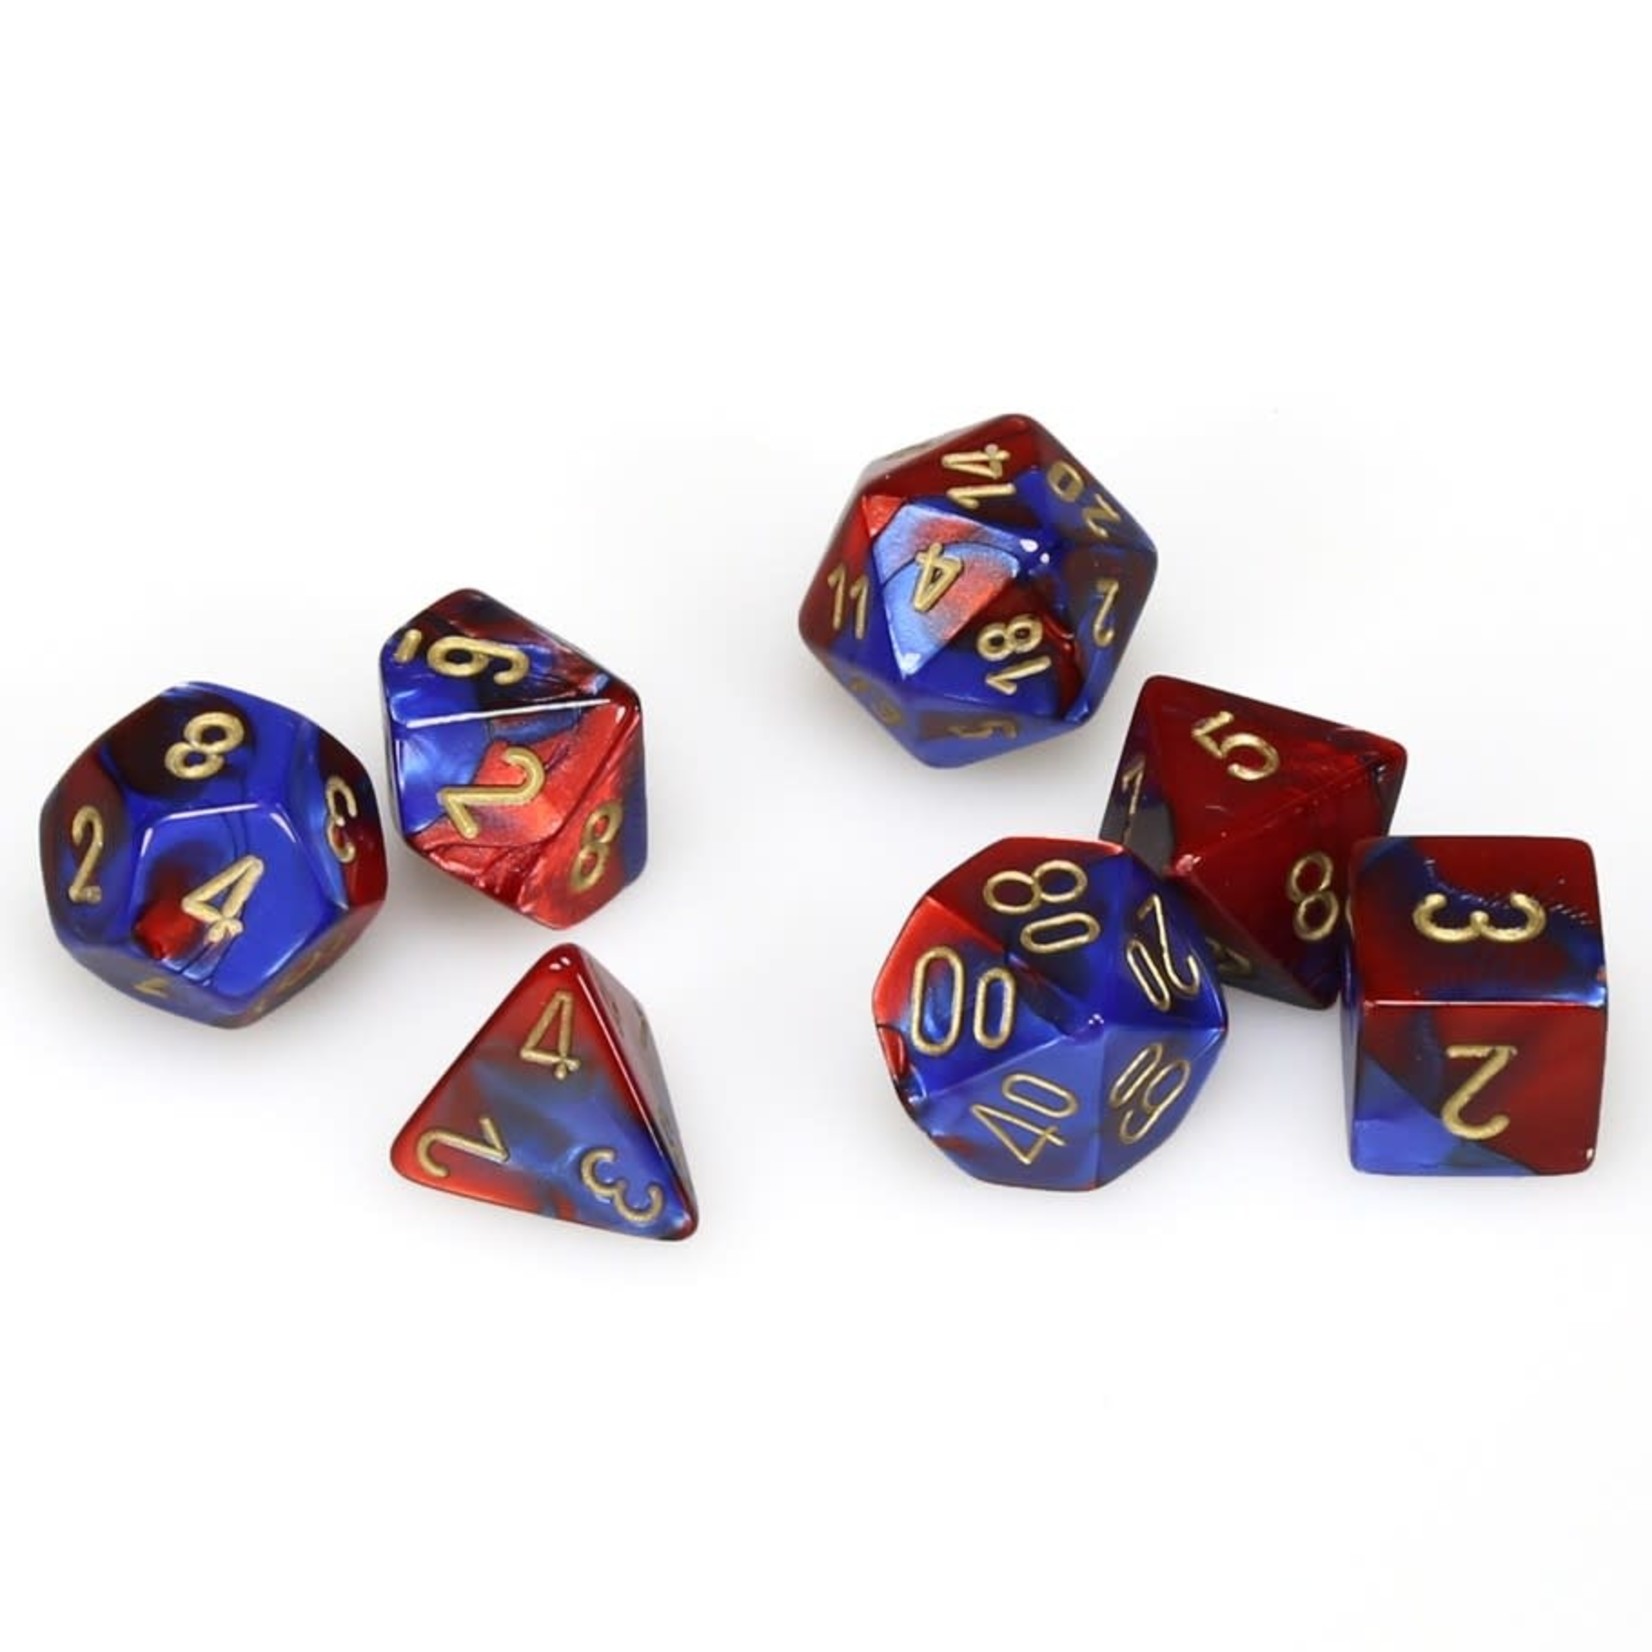 Chessex Chessex Gemini Blue / Red with Gold Polyhedral 7 die set